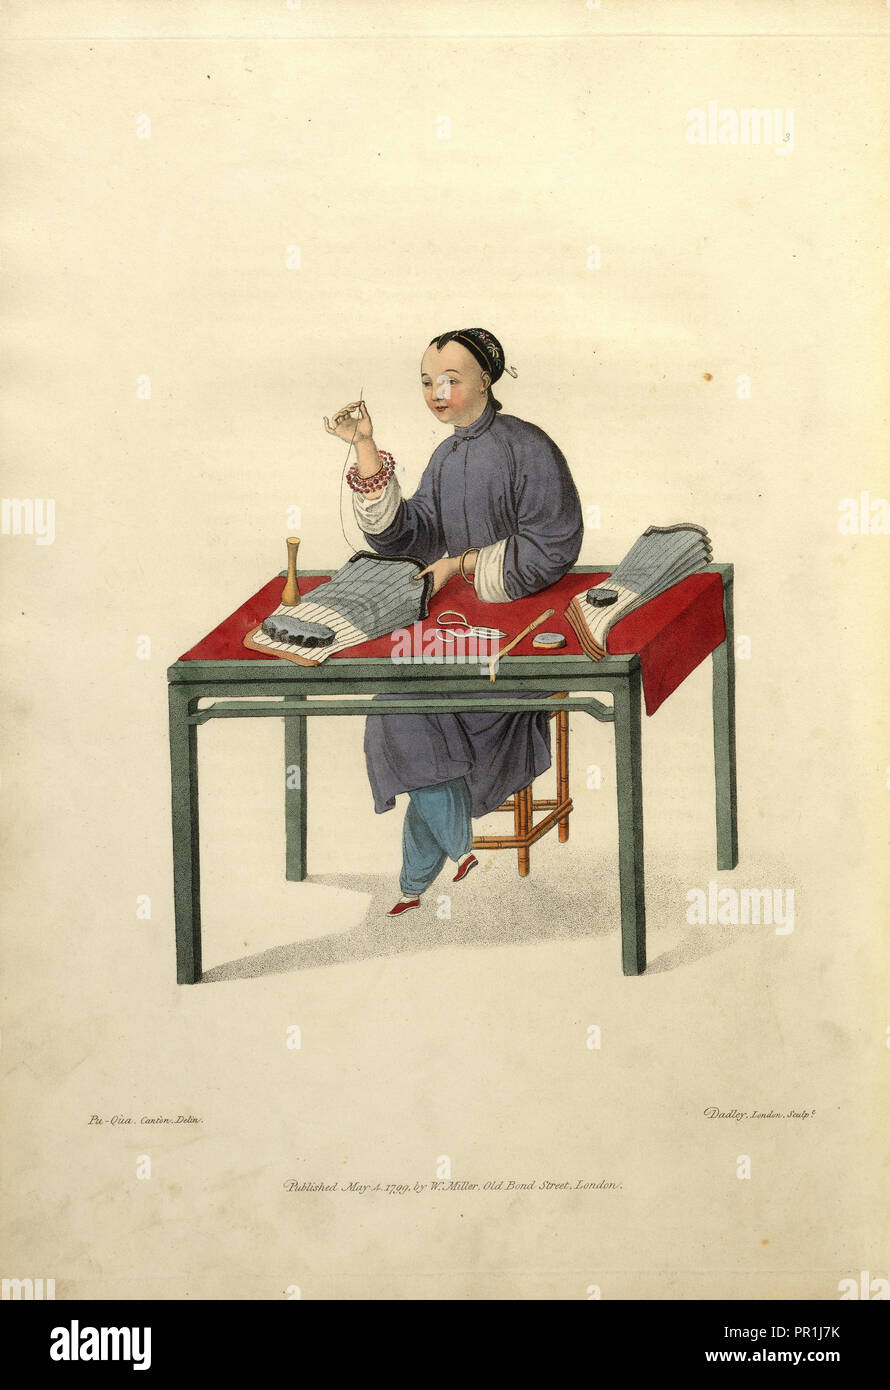 A woman making stockings, The costume of China, Dadley, J., Mason, George Henry, Pu-Qùa, Stipple engraving, hand-colored, 1800 Stock Photo